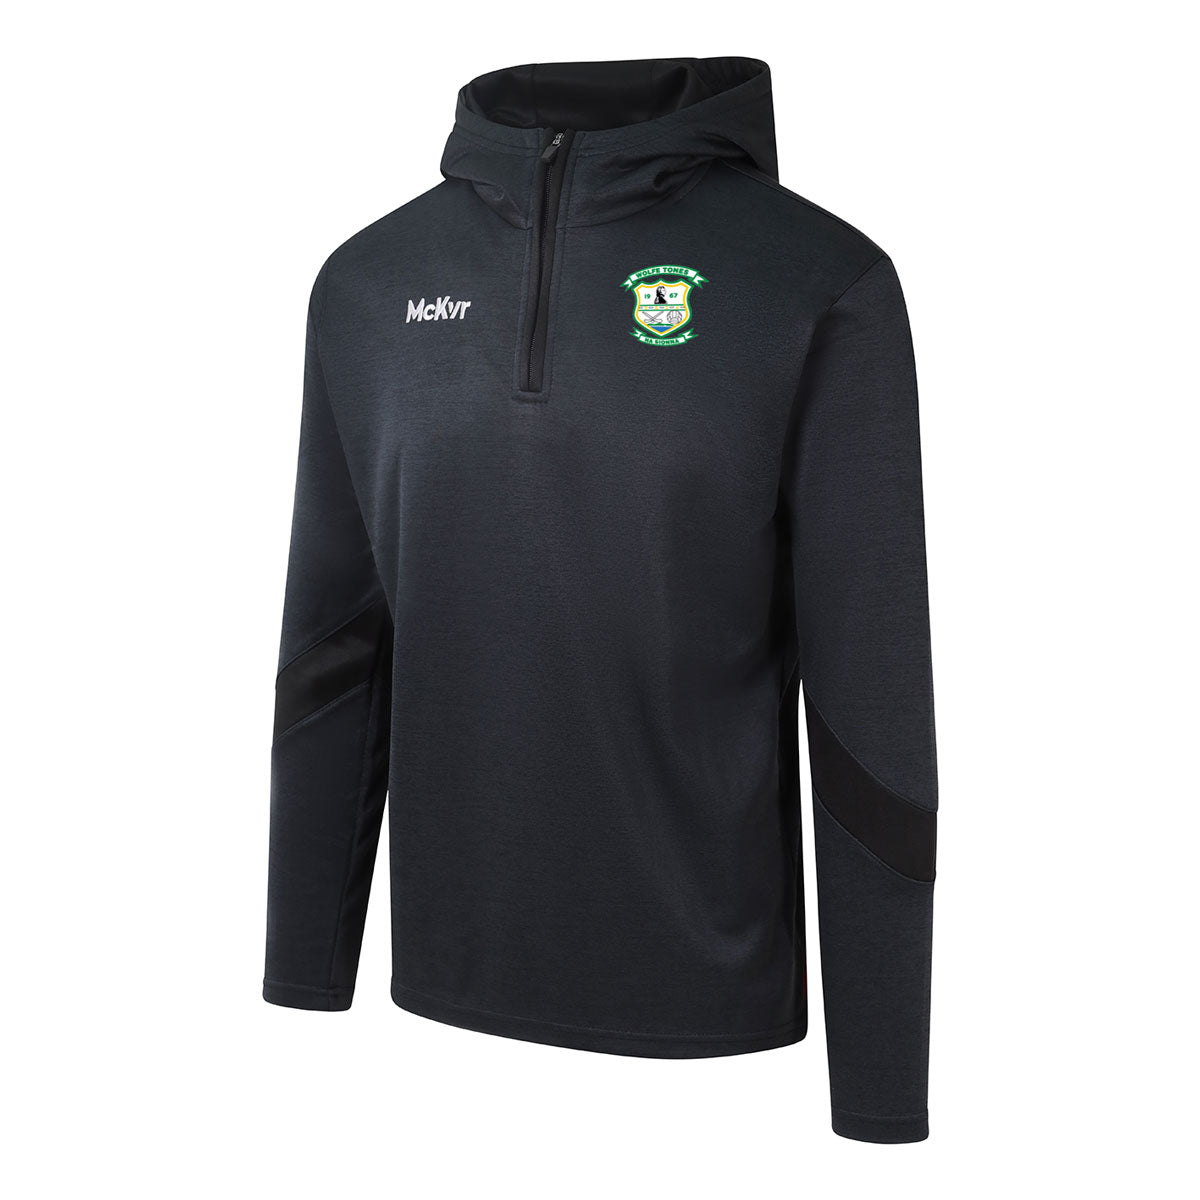 Mc Keever Wolfe Tones Na Sionna, Clare Core 22 1/4 Zip Hoodie - Adult - Black